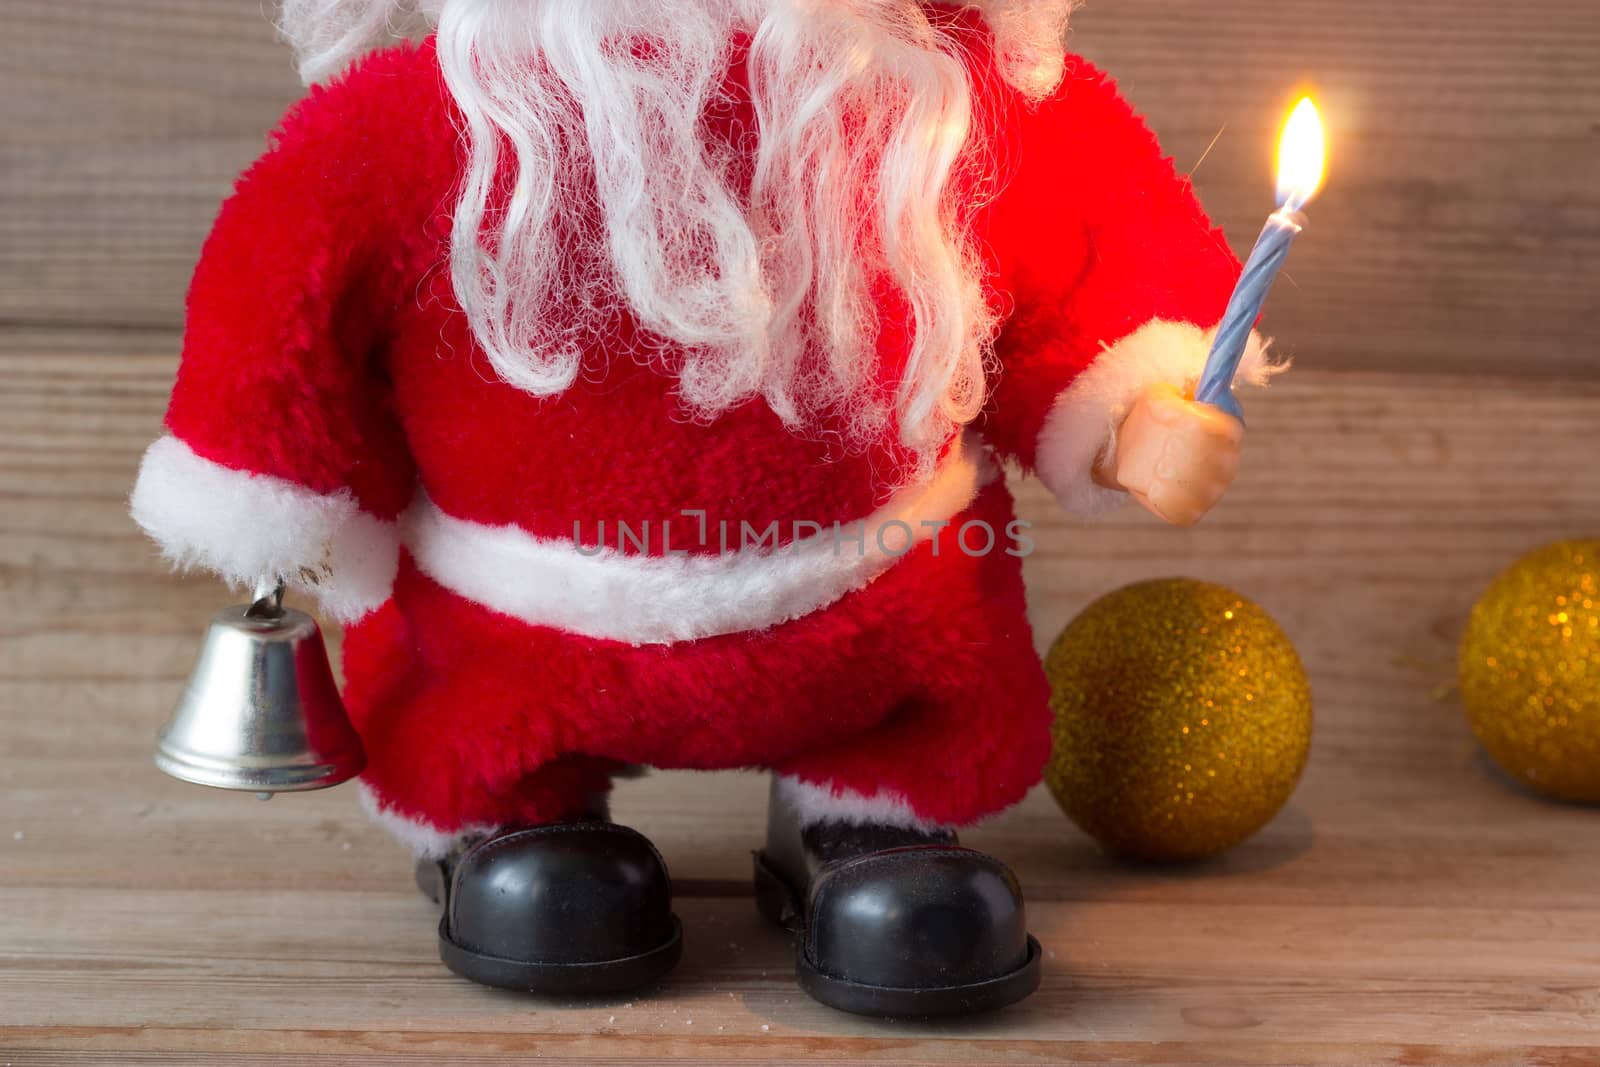  Santa Claus's hand with candle  by liwei12